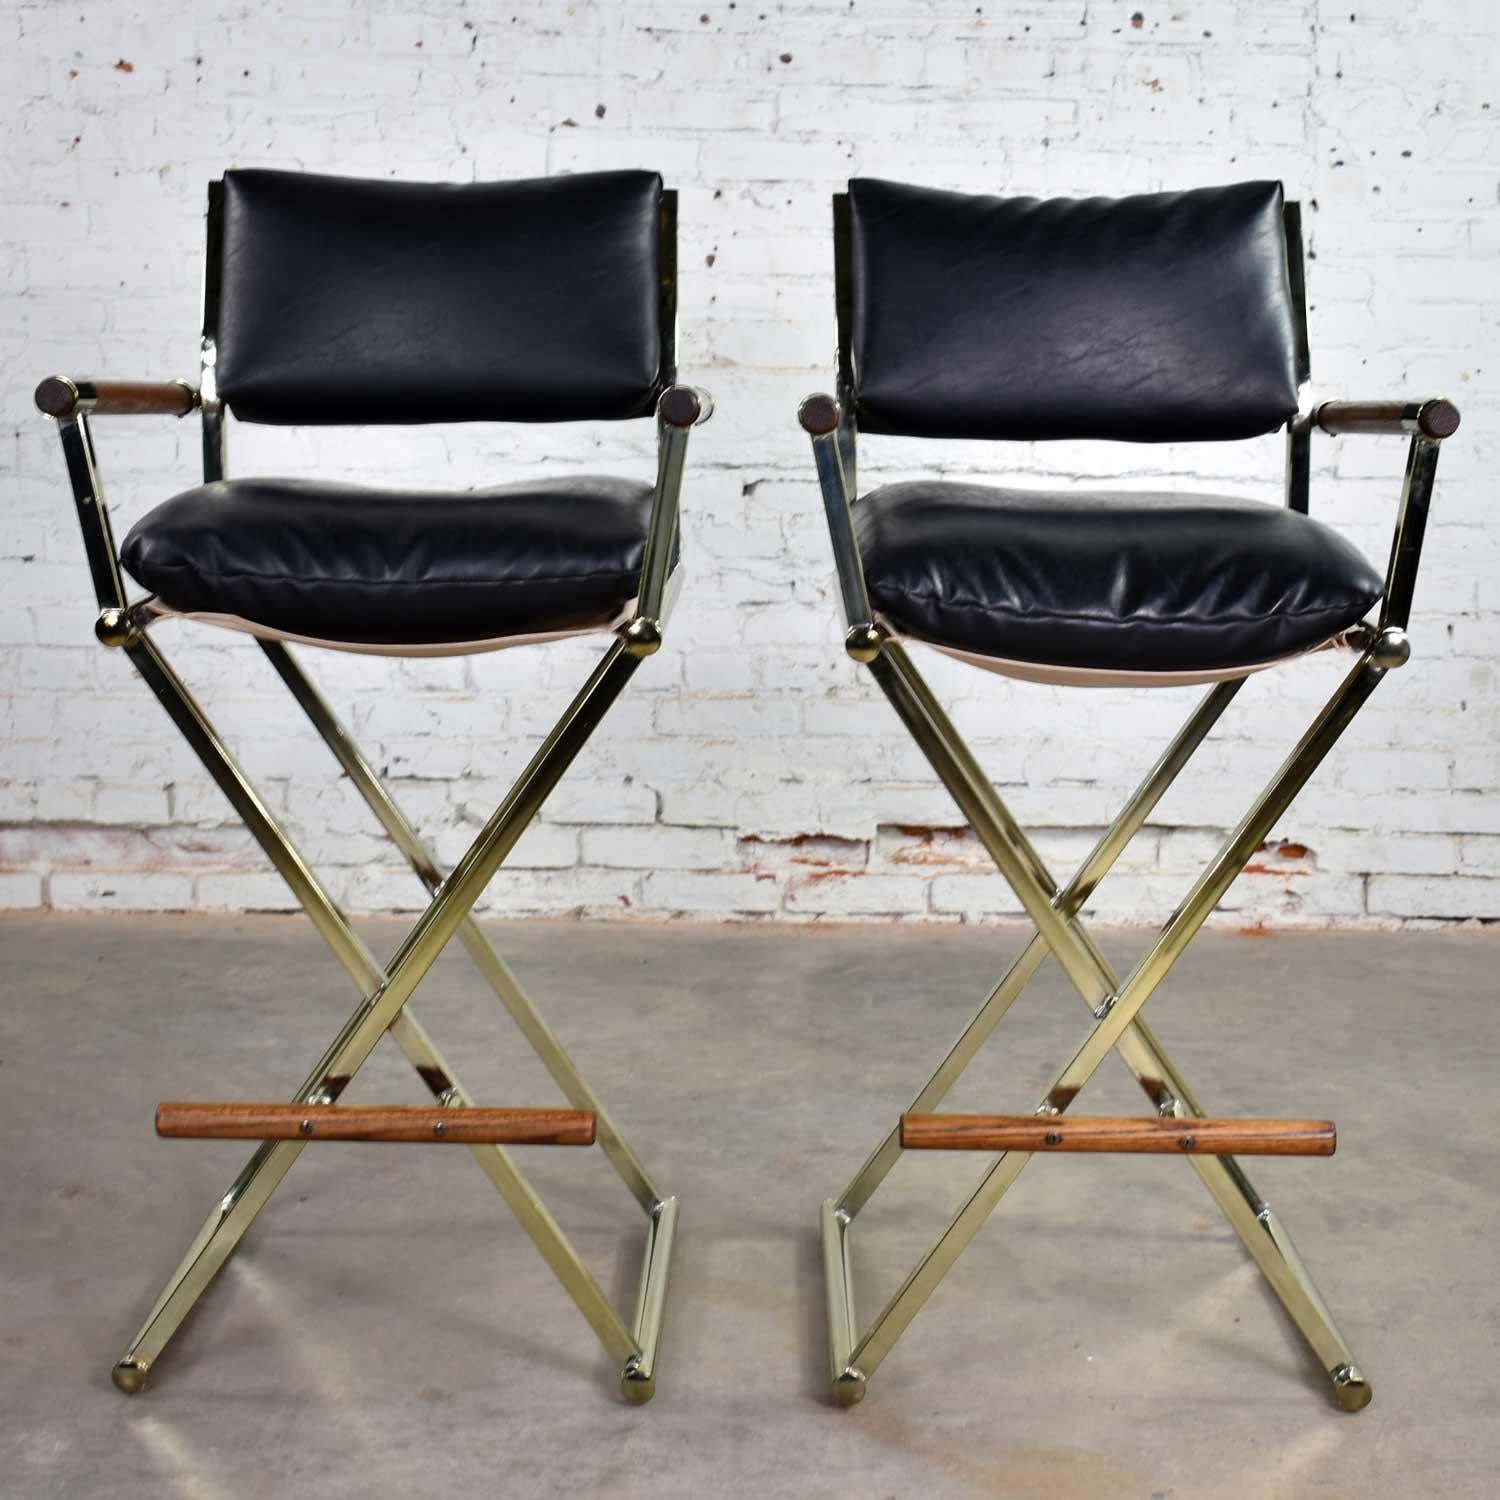 Handsome pair of vintage director’s chair style barstools in brass plate, oak, and black vinyl. Some say in the style of Milo Baughman. They are in wonderful vintage condition with normal age appropriate wear but nothing outstanding. Please see